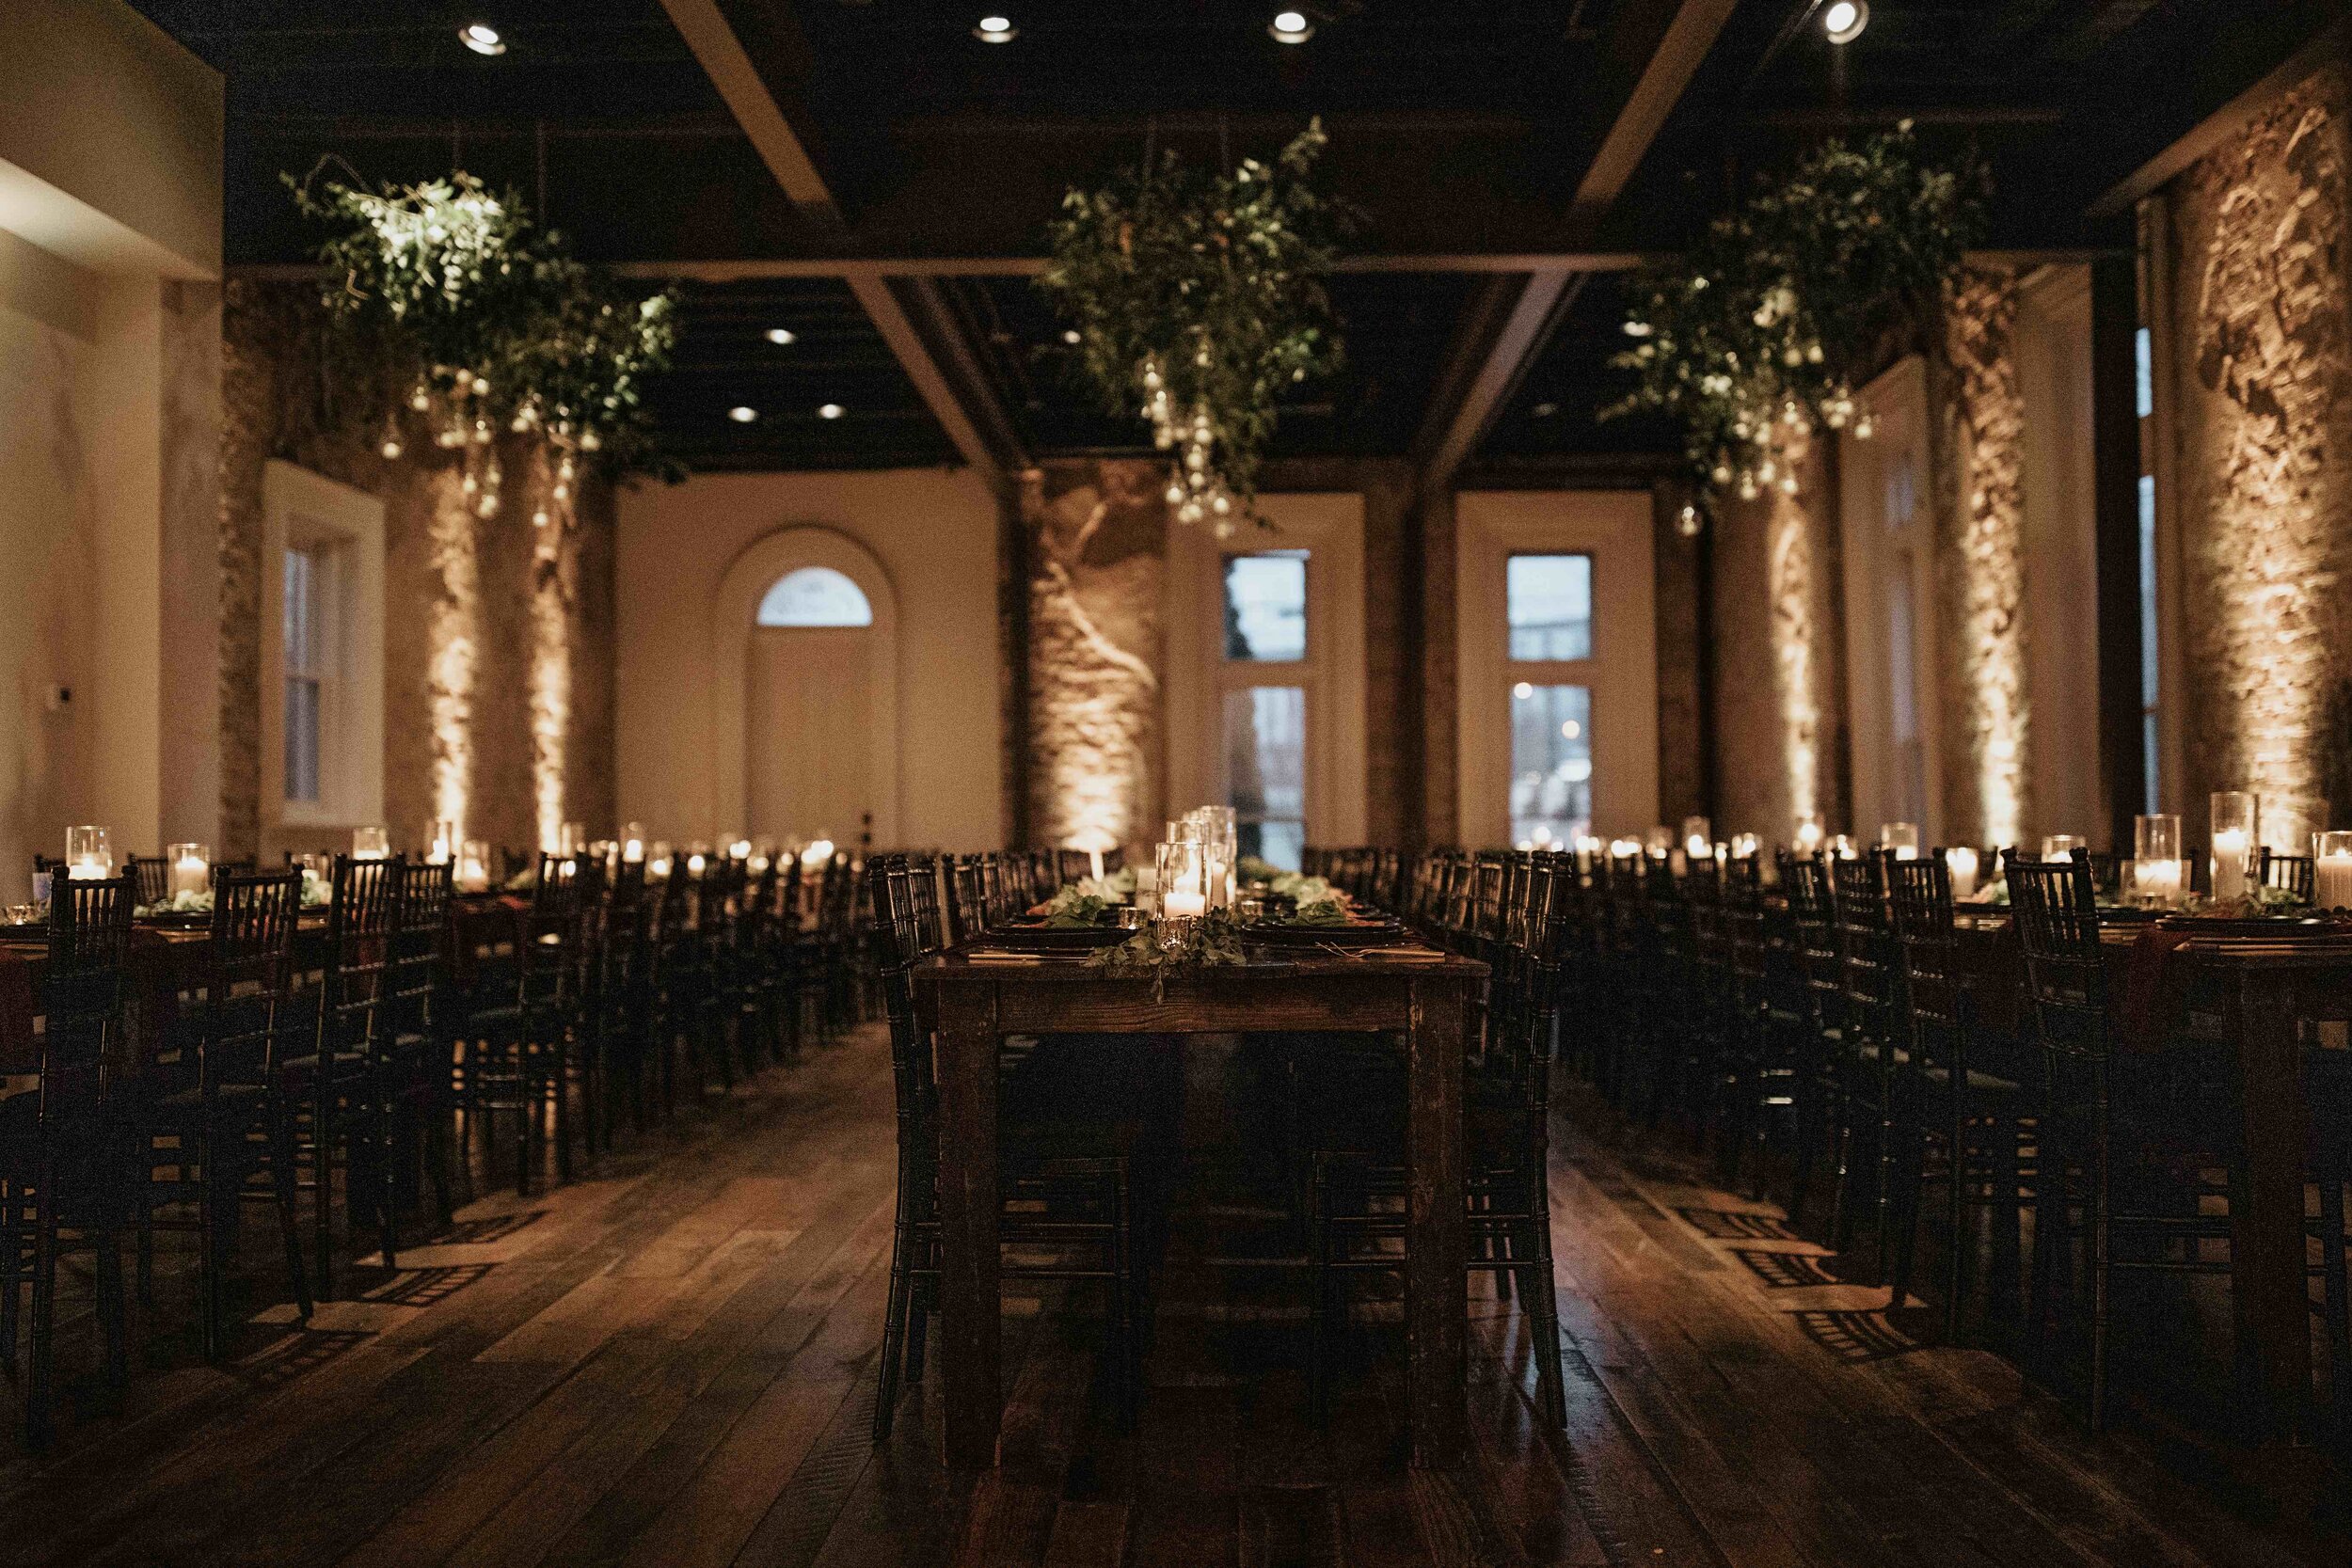 Hanging terrarium candle installation with lush greenery. Nashville wedding floral design at the Cordelle.